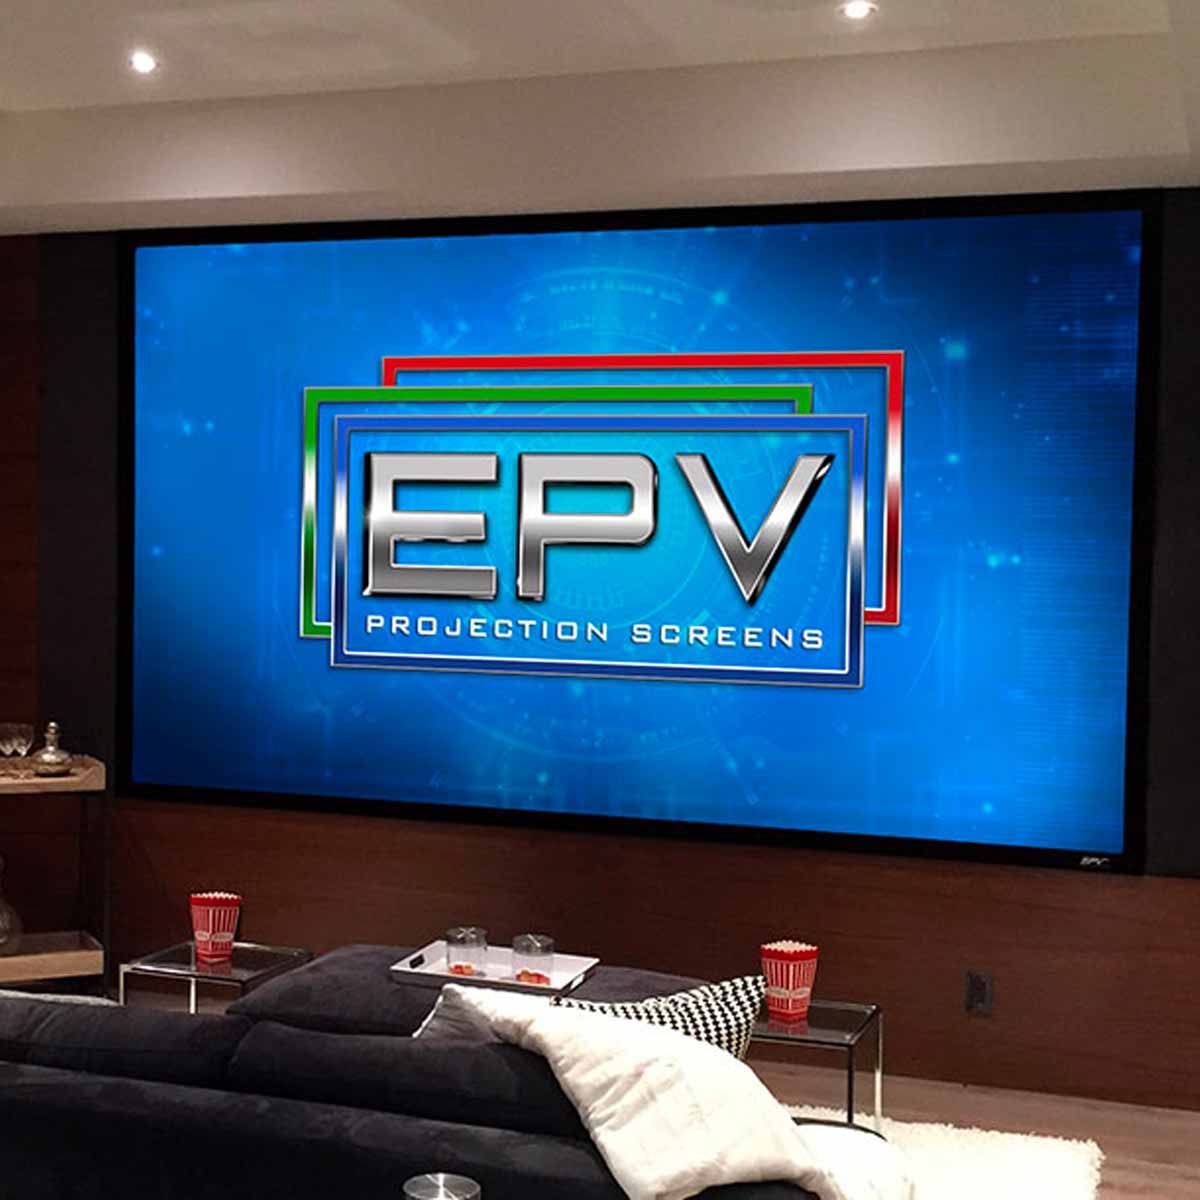 EPV Prime Vision ISF 3 Projector Screen installed in theater with image of EPV logo